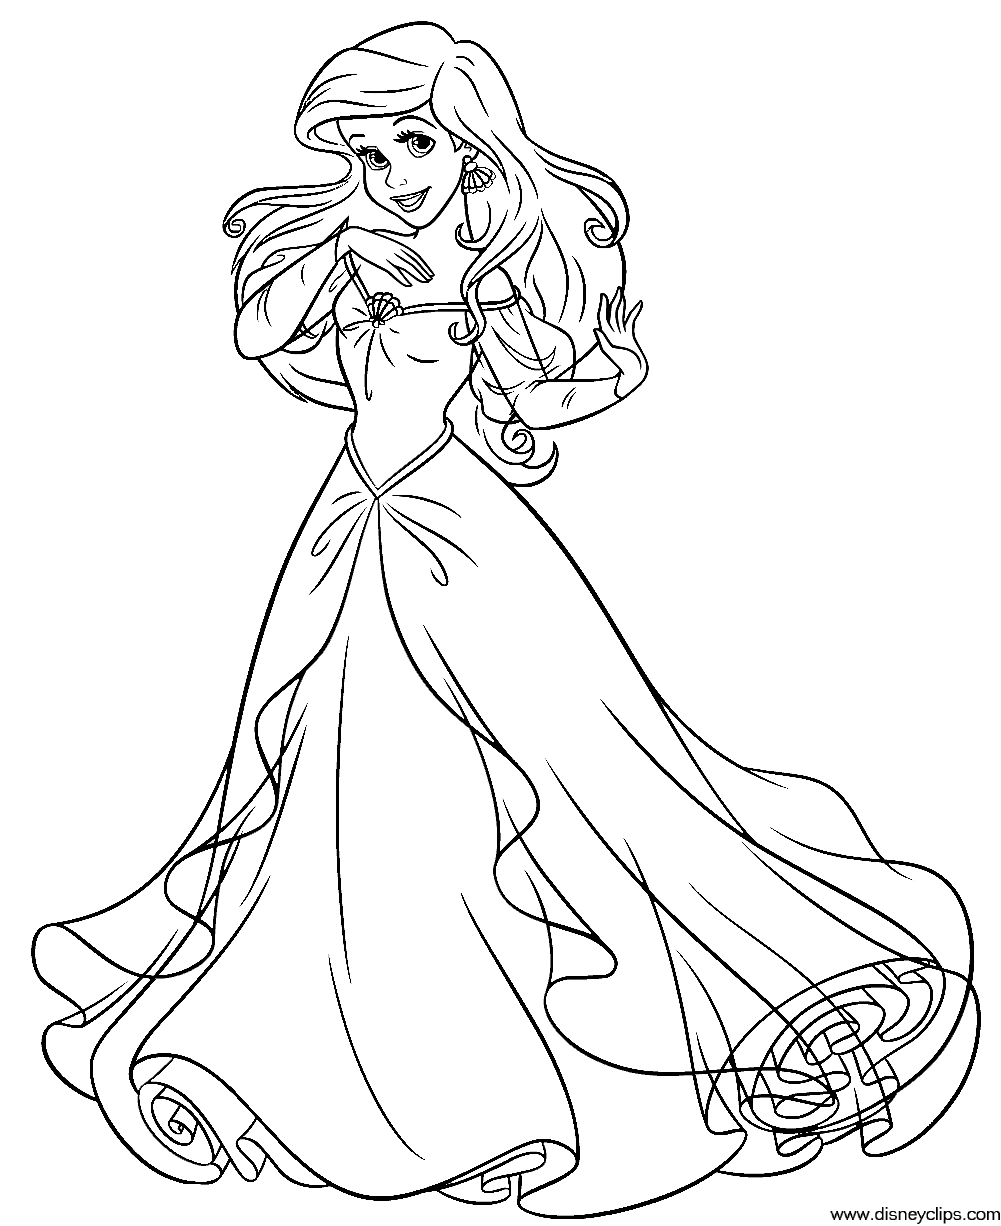 ariel the little mermaid coloring pages the little mermaid coloring pages 3 disneyclipscom mermaid coloring ariel the pages little 